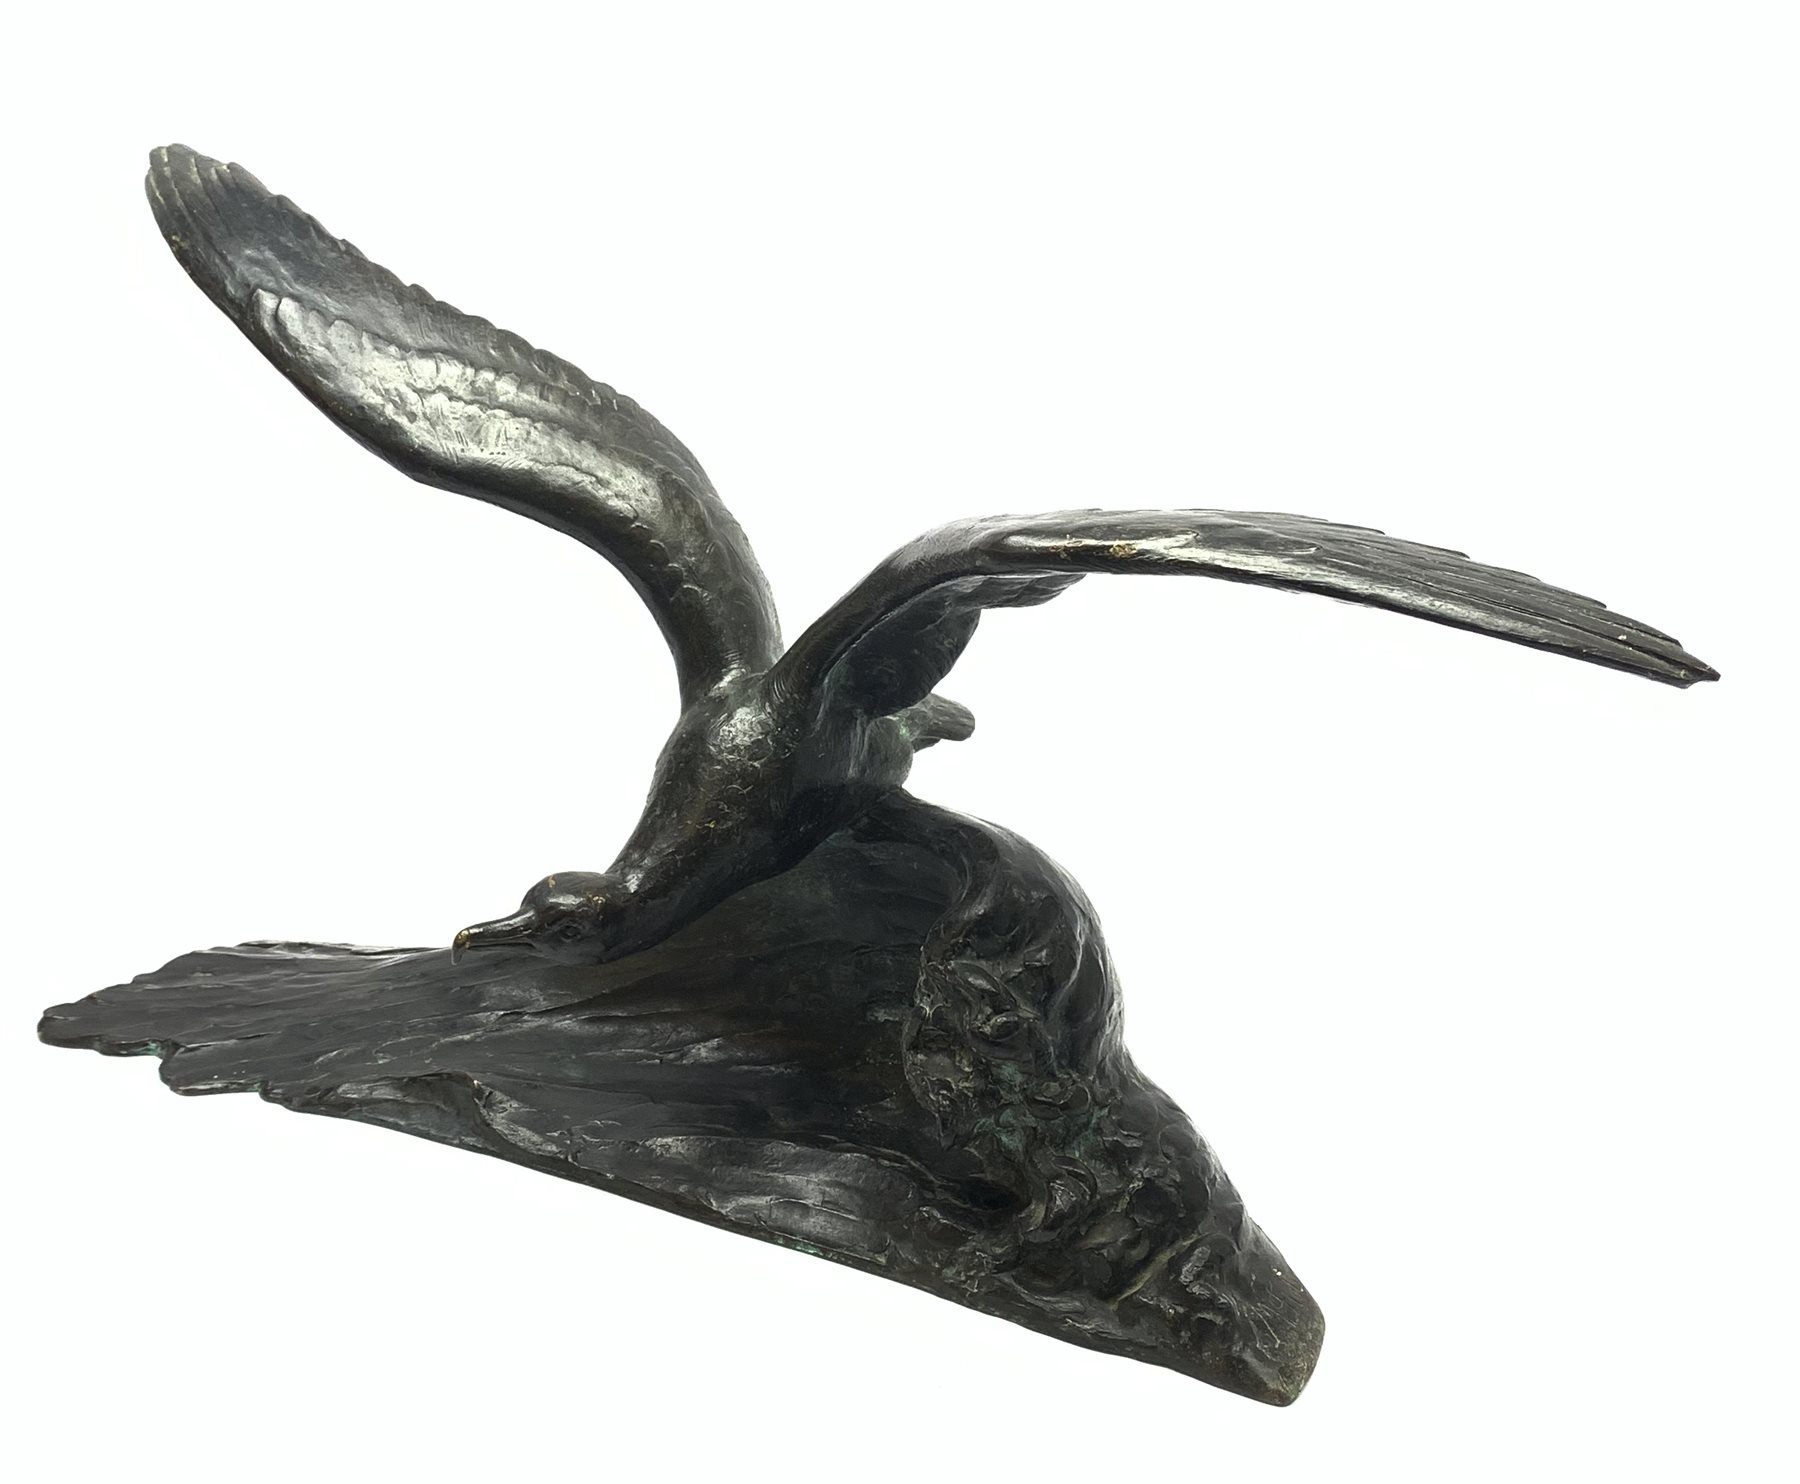 After Maximilien Louis Fiot (1886 - 1953), bronze figure of a seagull with wings outstretched landin